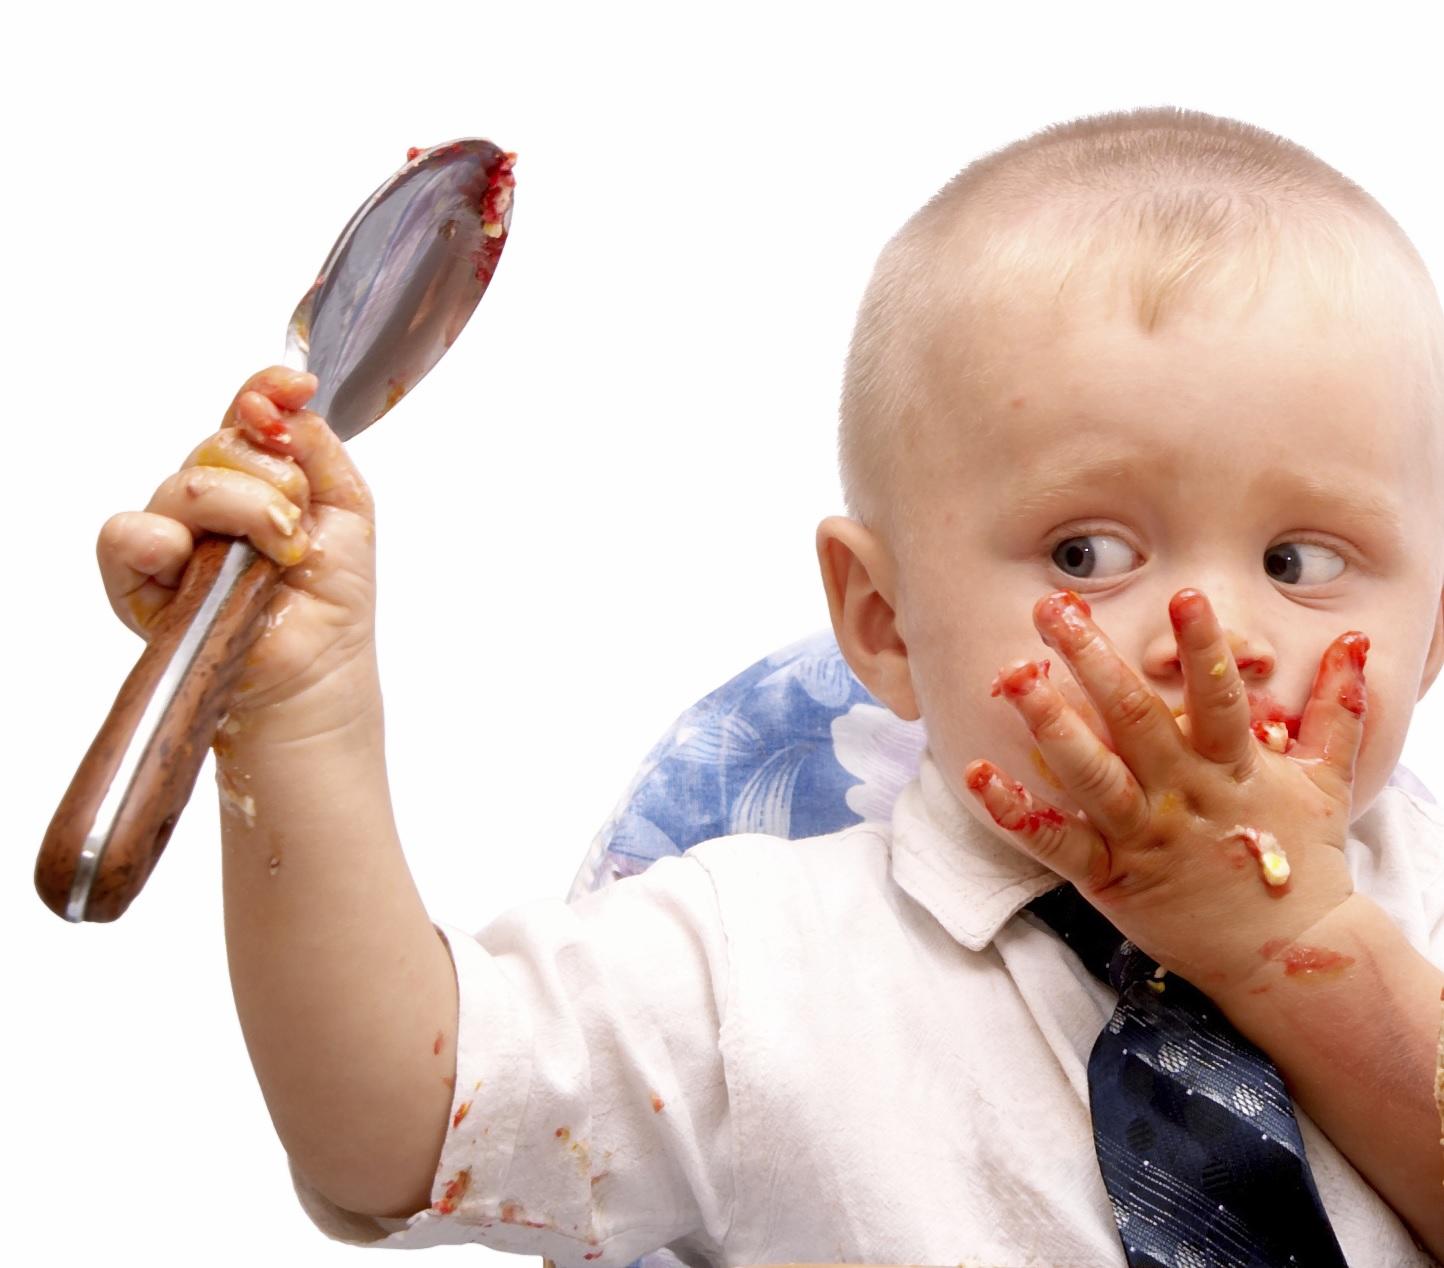 A Dirty Baby (Photo: iStock)